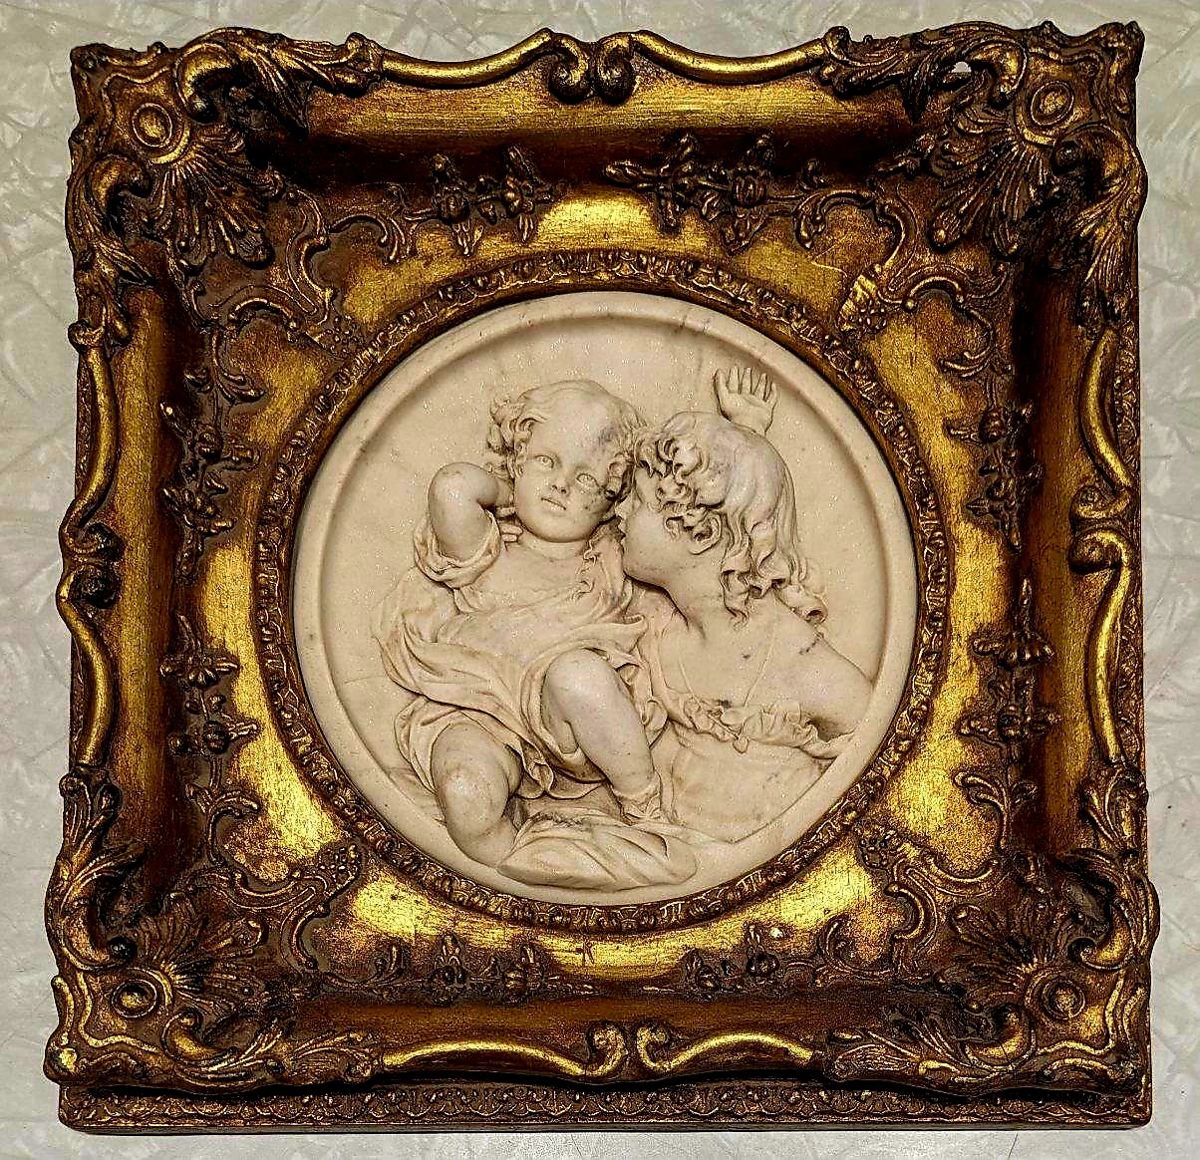 Unbelievable marble relief in Gilt ornate frames of children